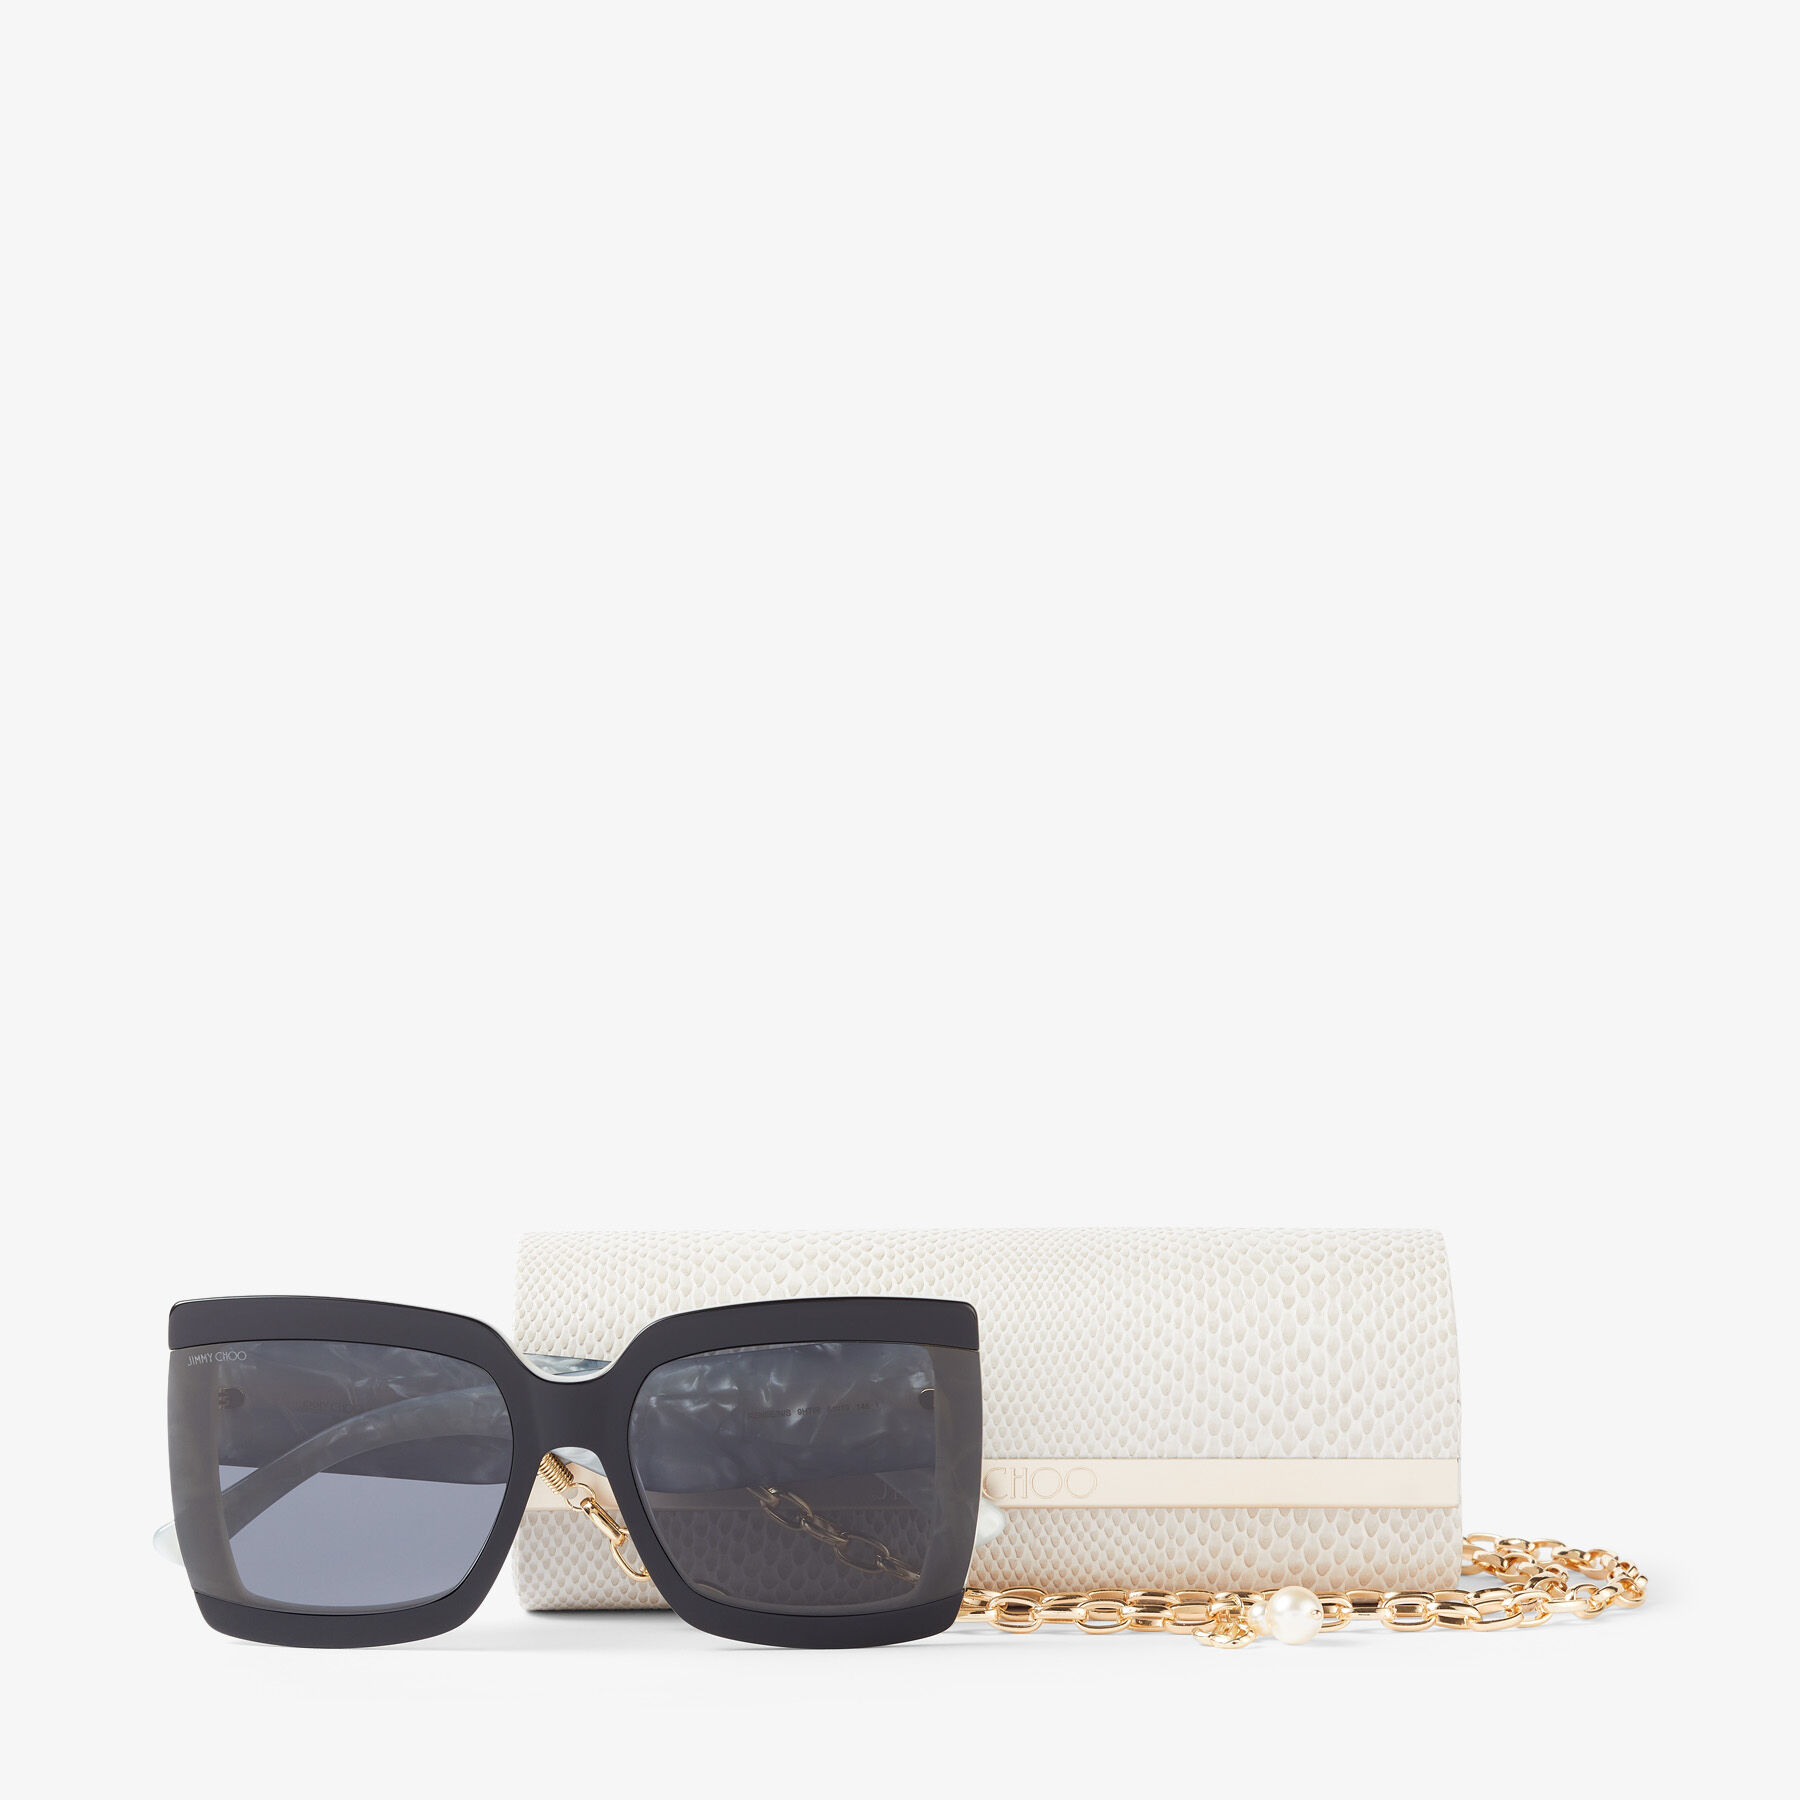 Black and Ivory Square-Frame Sunglasses with Detachable Chain, RENEE/N/S  61, Autumn 2022 collection